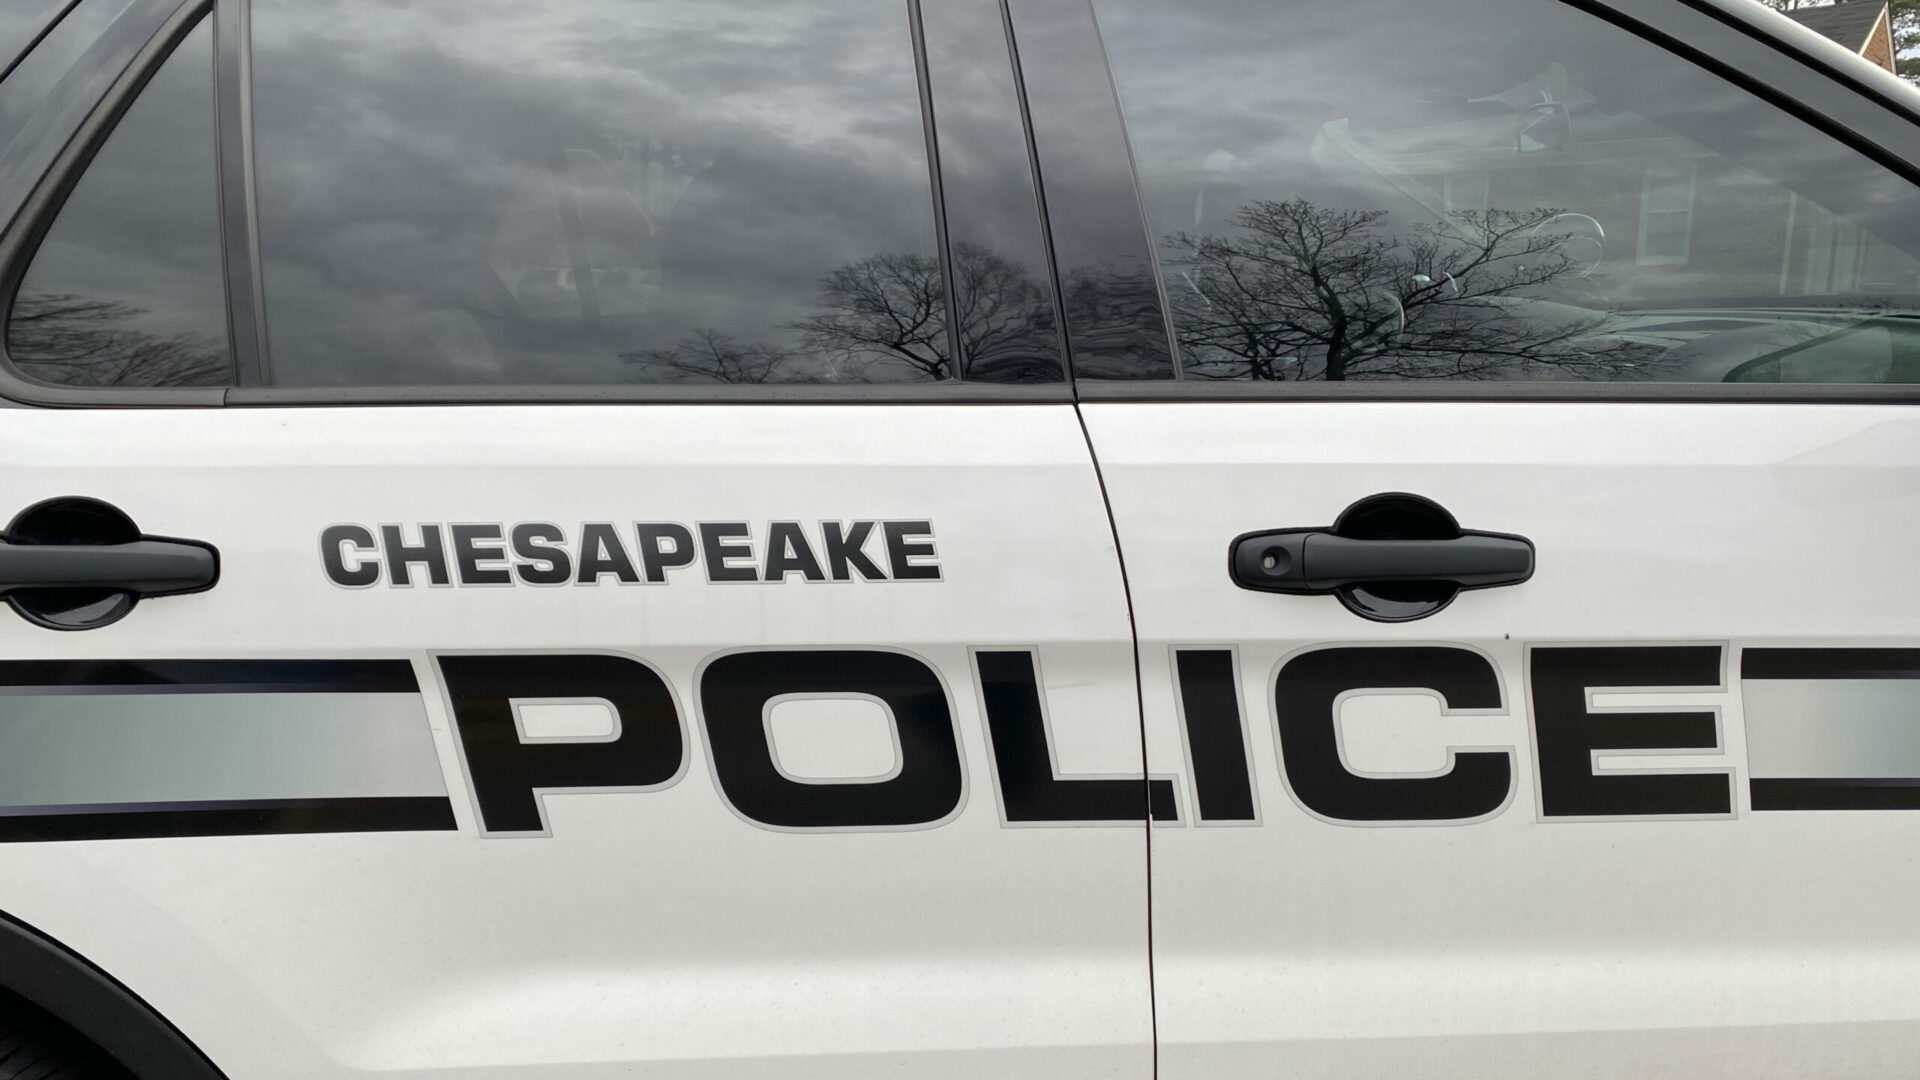 Man arrested, charged after Chesapeake roadway shooting